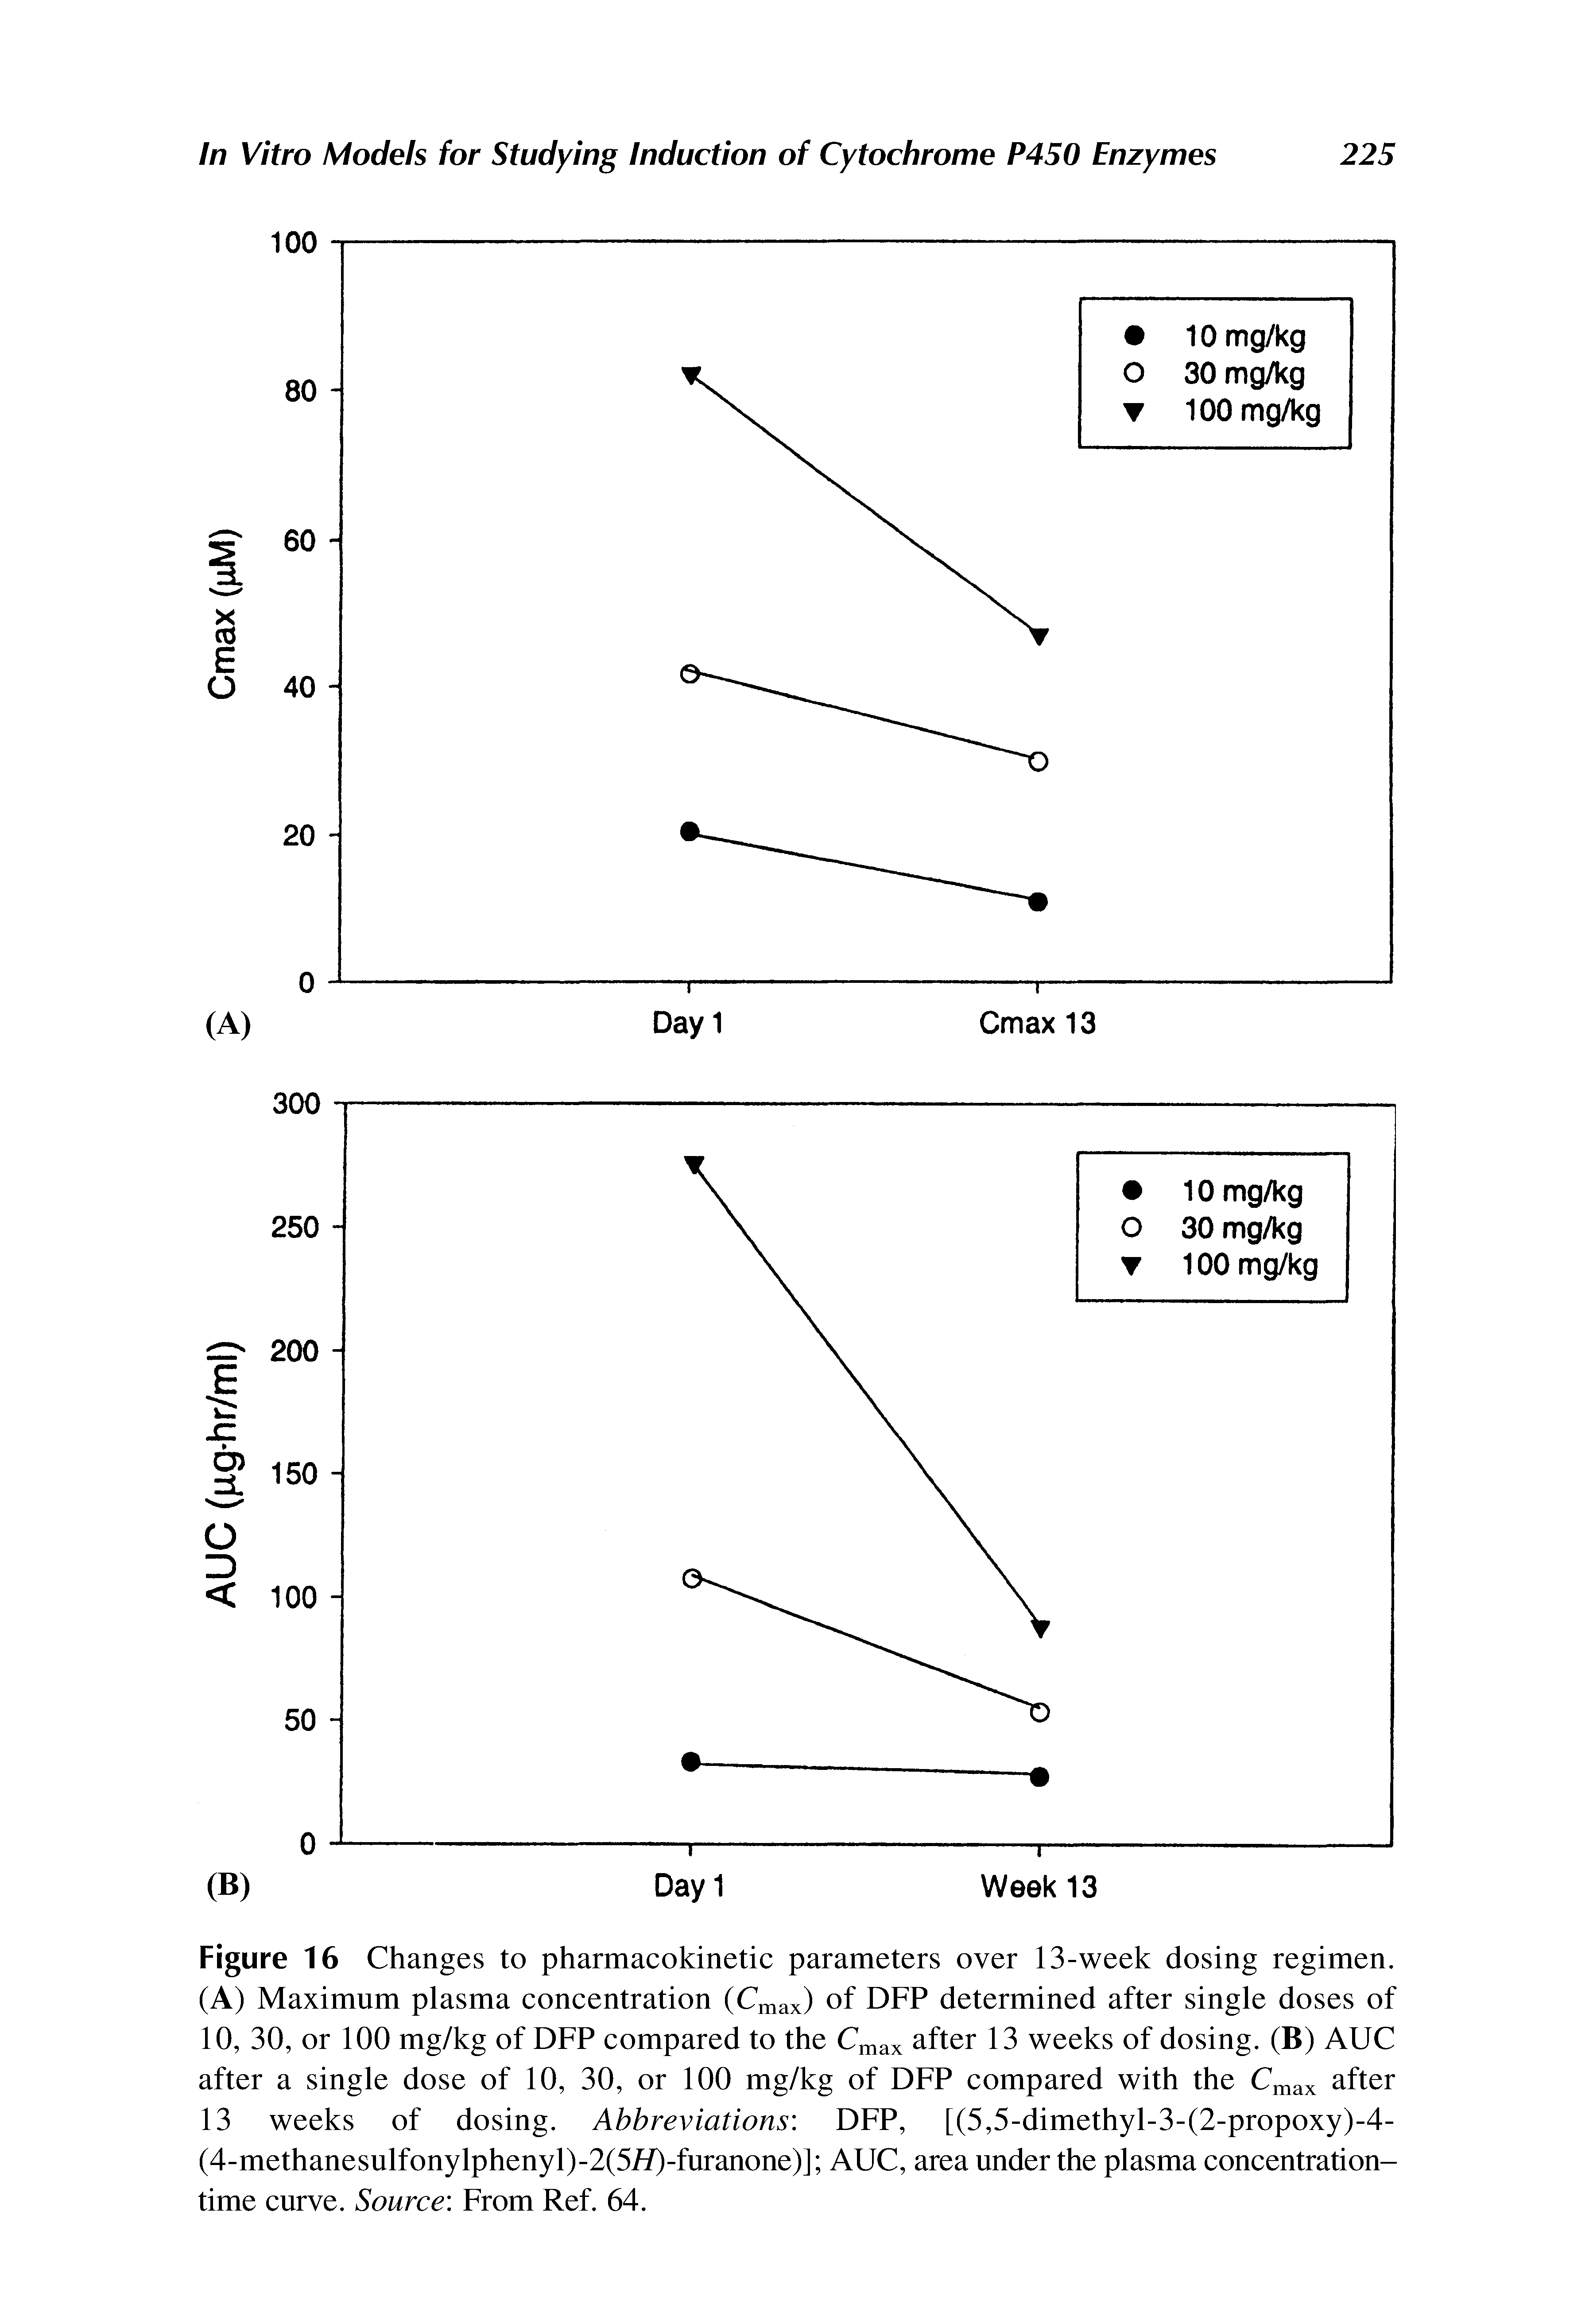 Figure 16 Changes to pharmacokinetic parameters over 13-week dosing regimen. (A) Maximum plasma concentration (Cmax) of DFP determined after single doses of 10, 30, or 100 mg/kg of DFP compared to the Cmax after 13 weeks of dosing. (B) AUC after a single dose of 10, 30, or 100 mg/kg of DFP compared with the Cmax after 13 weeks of dosing. Abbreviations DFP, [(5,5-dimethyl-3-(2-propoxy)-4-(4-methanesulfonylphenyl)-2(5//)-furanone)J AUC, area under the plasma concentrationtime curve. Source From Ref. 64.